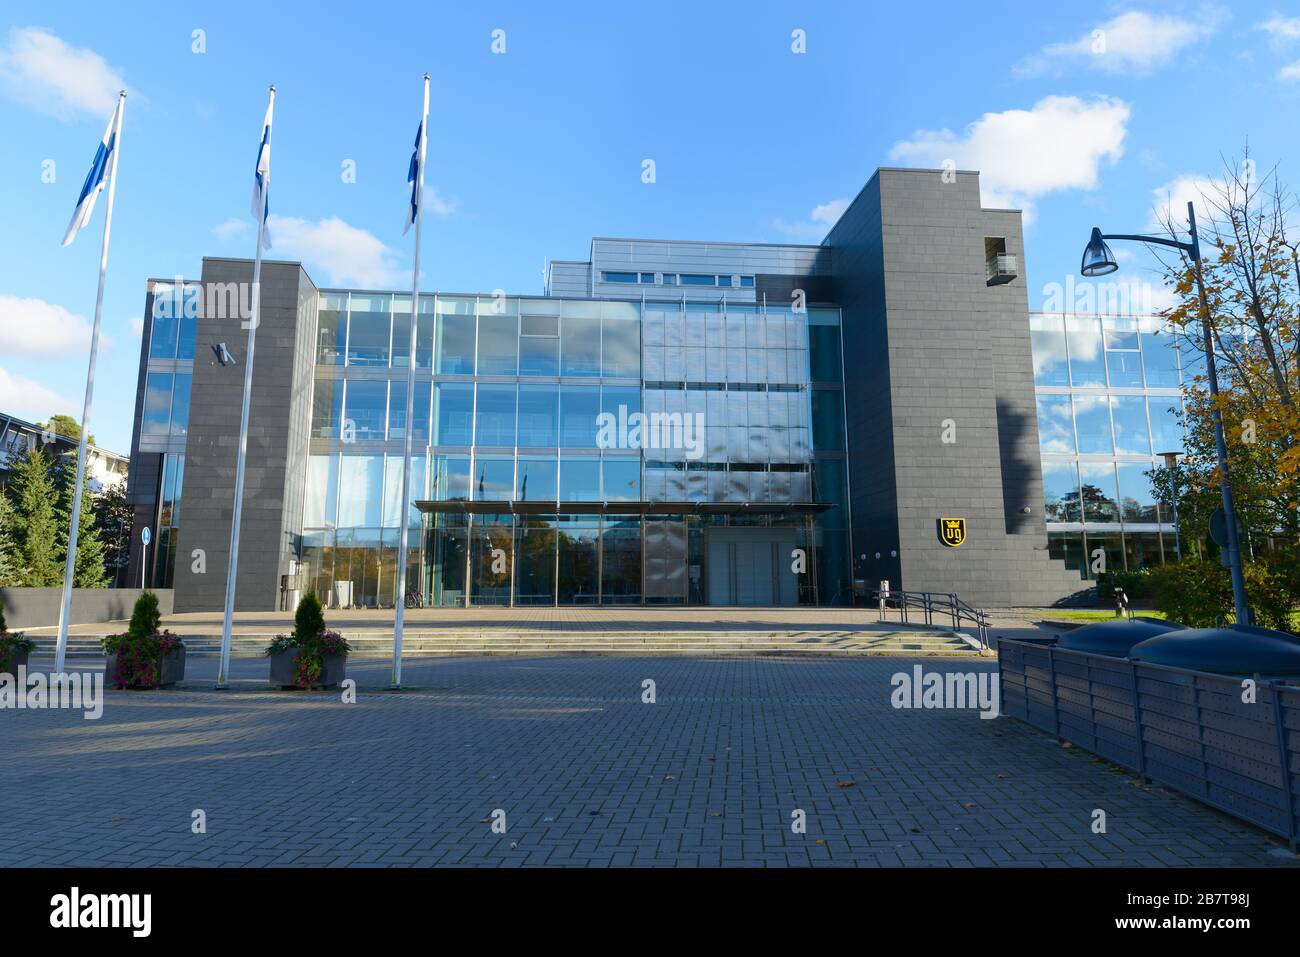 Entrance of modern building of Naantali city with three Finnish flag poles in front Stock Photo